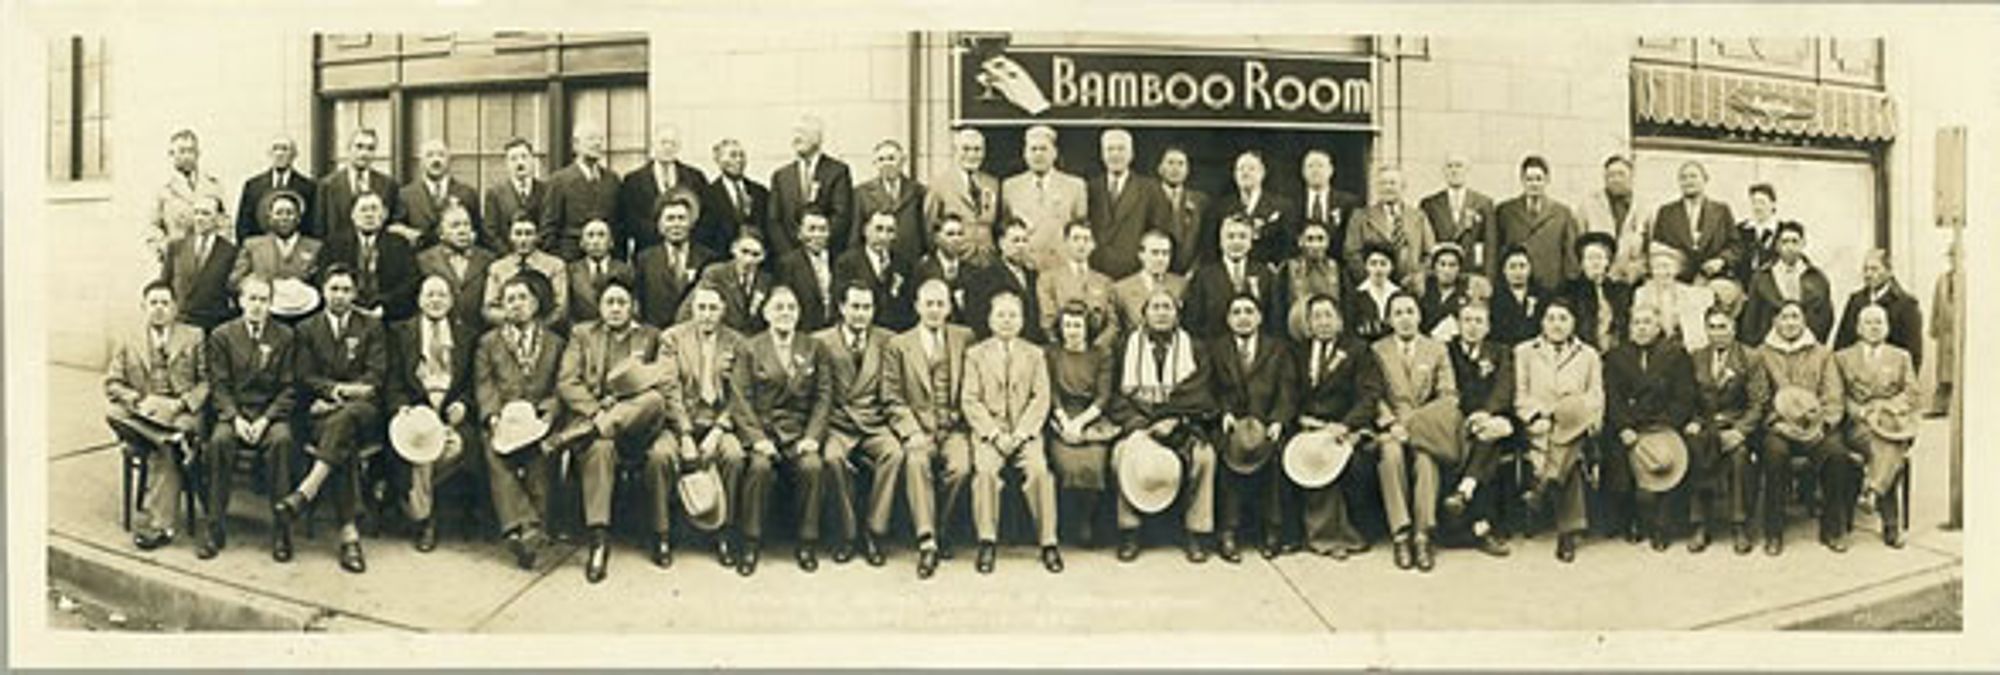 an old photograph of a group of people